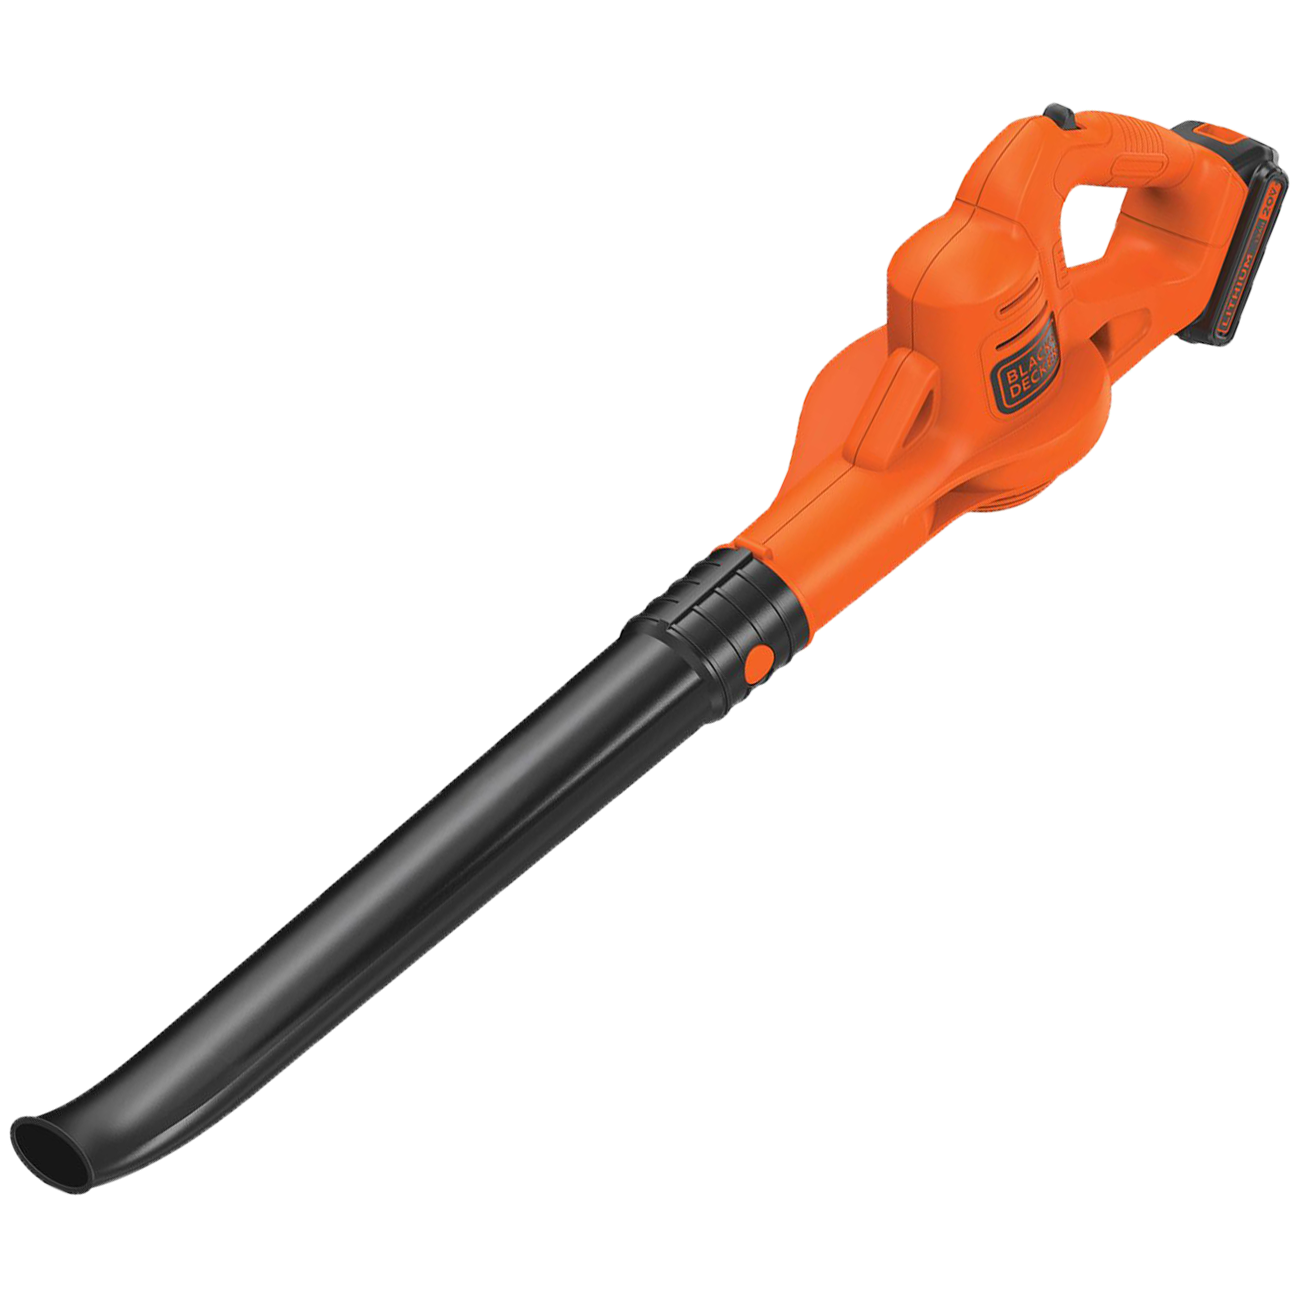 BLACK+DECKER 20V Max Lithium Sweeper LSW221 